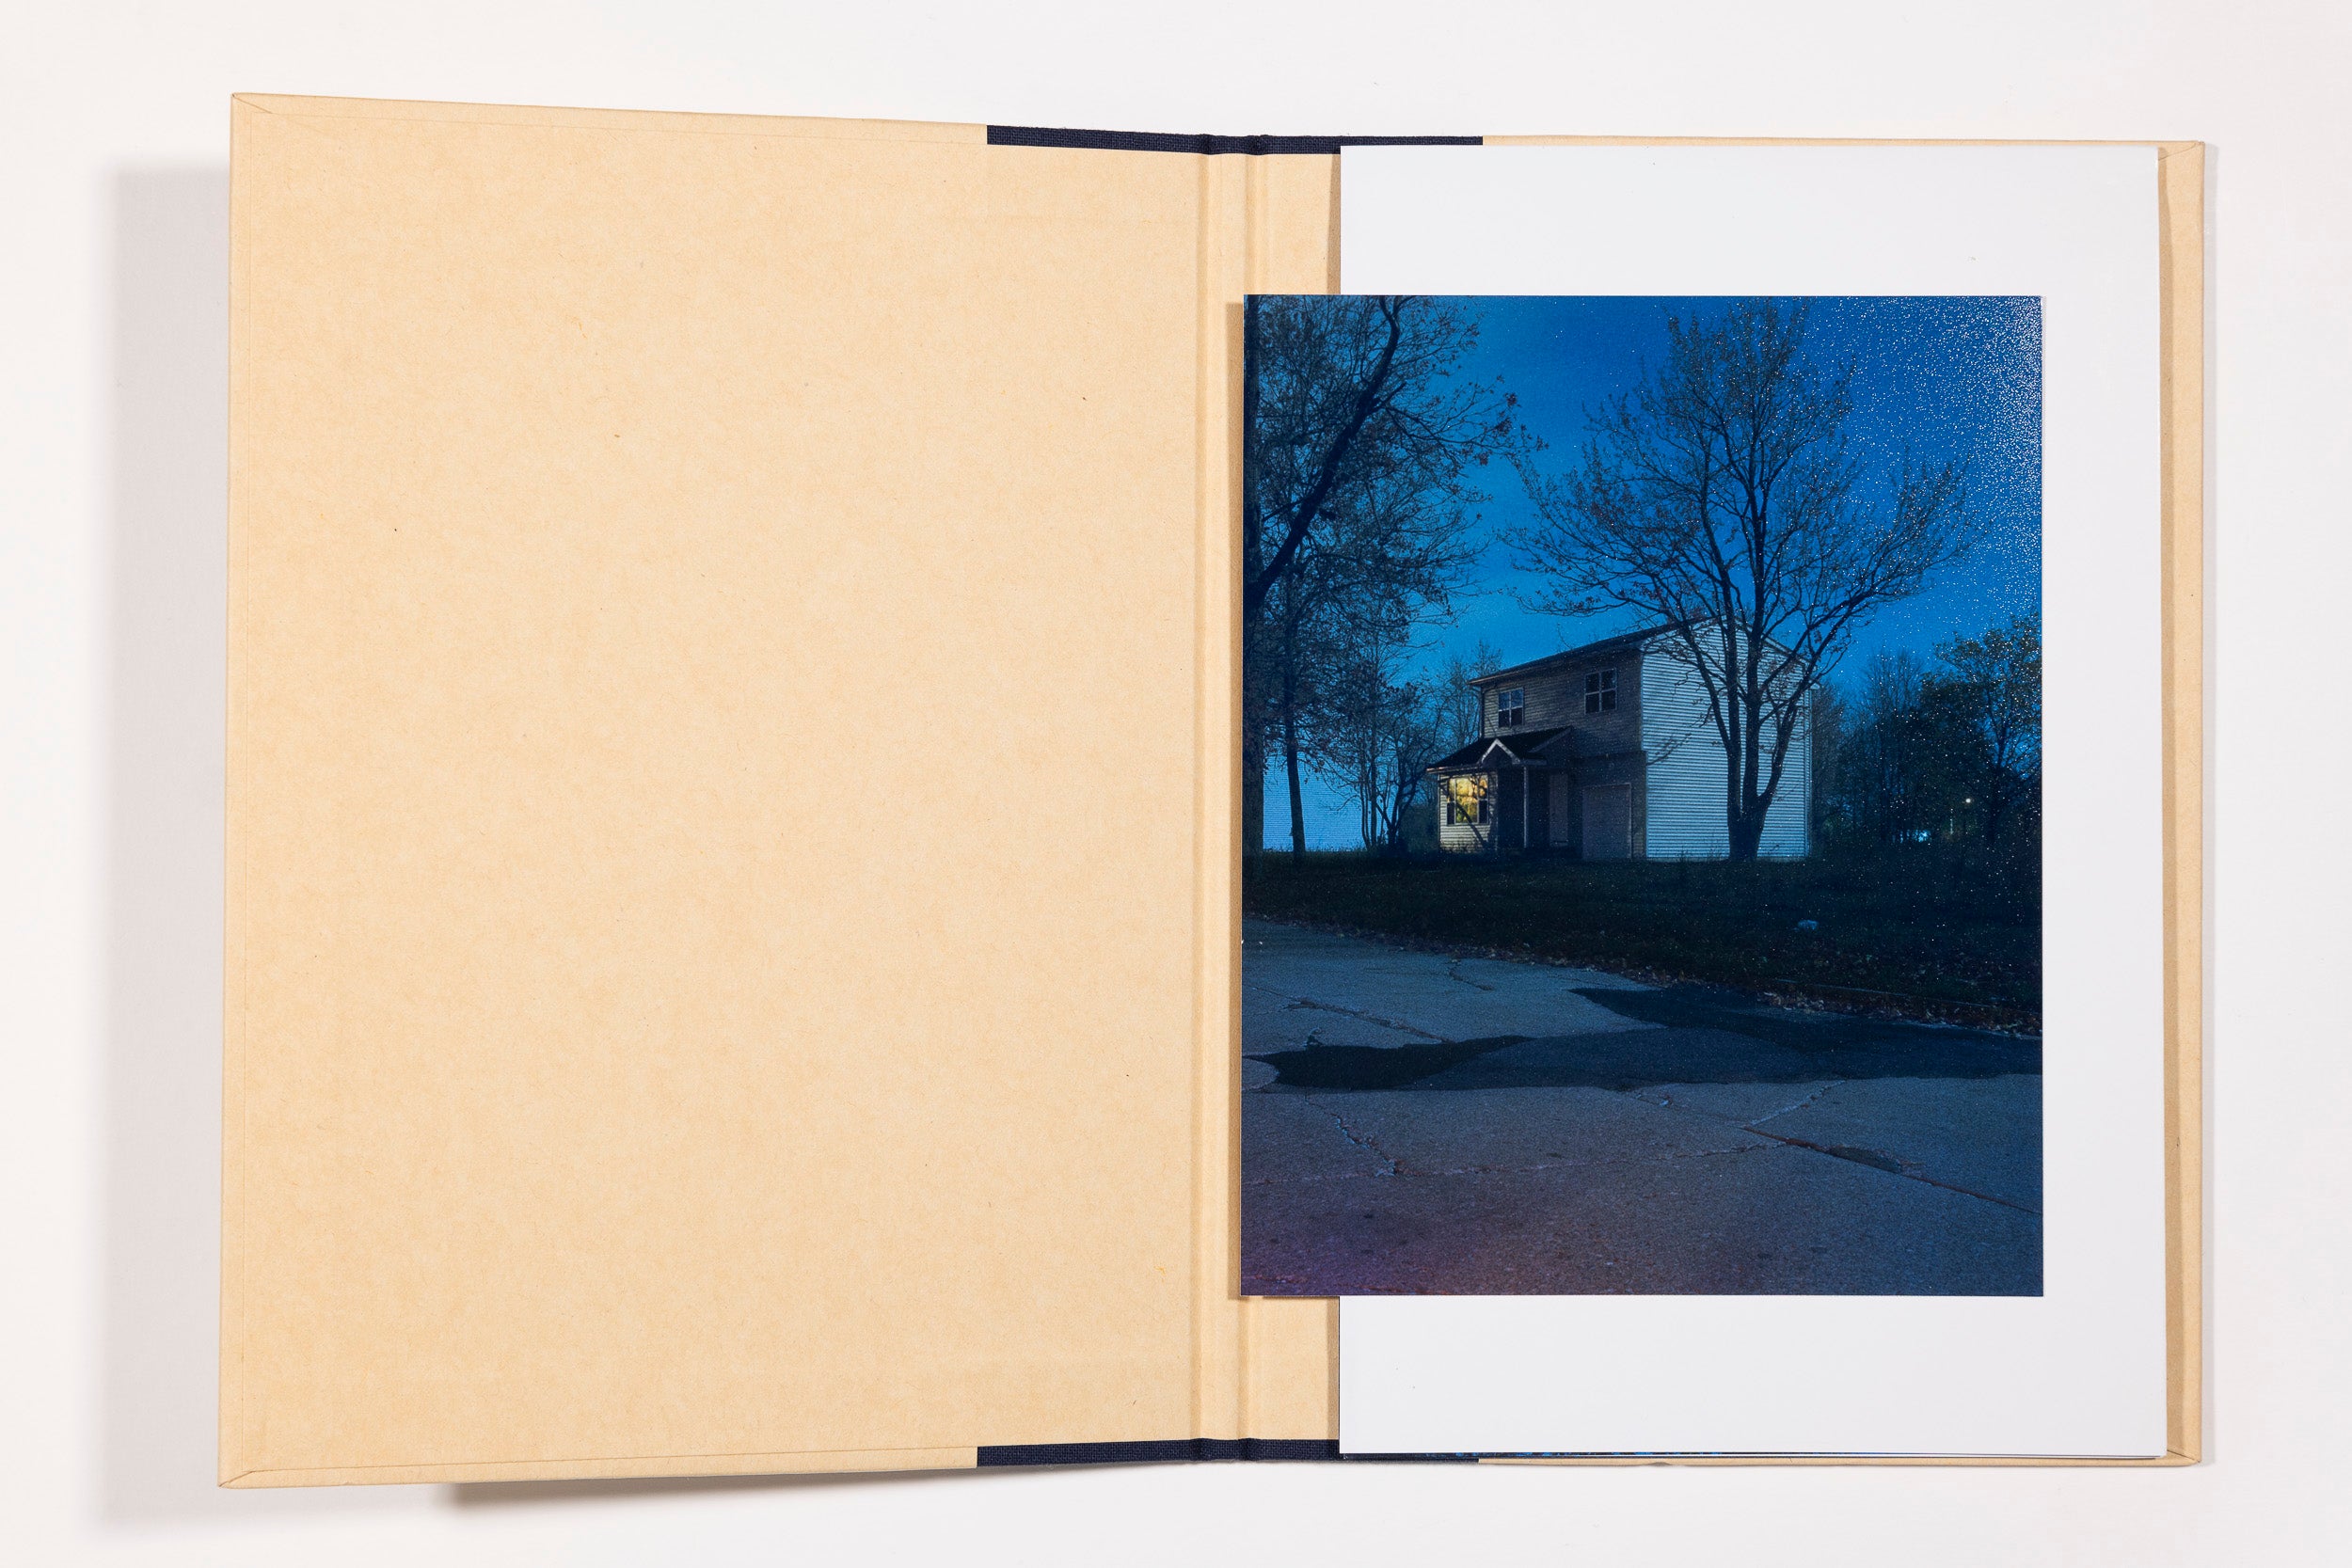 One Picture Book Two #34 - Todd Hido